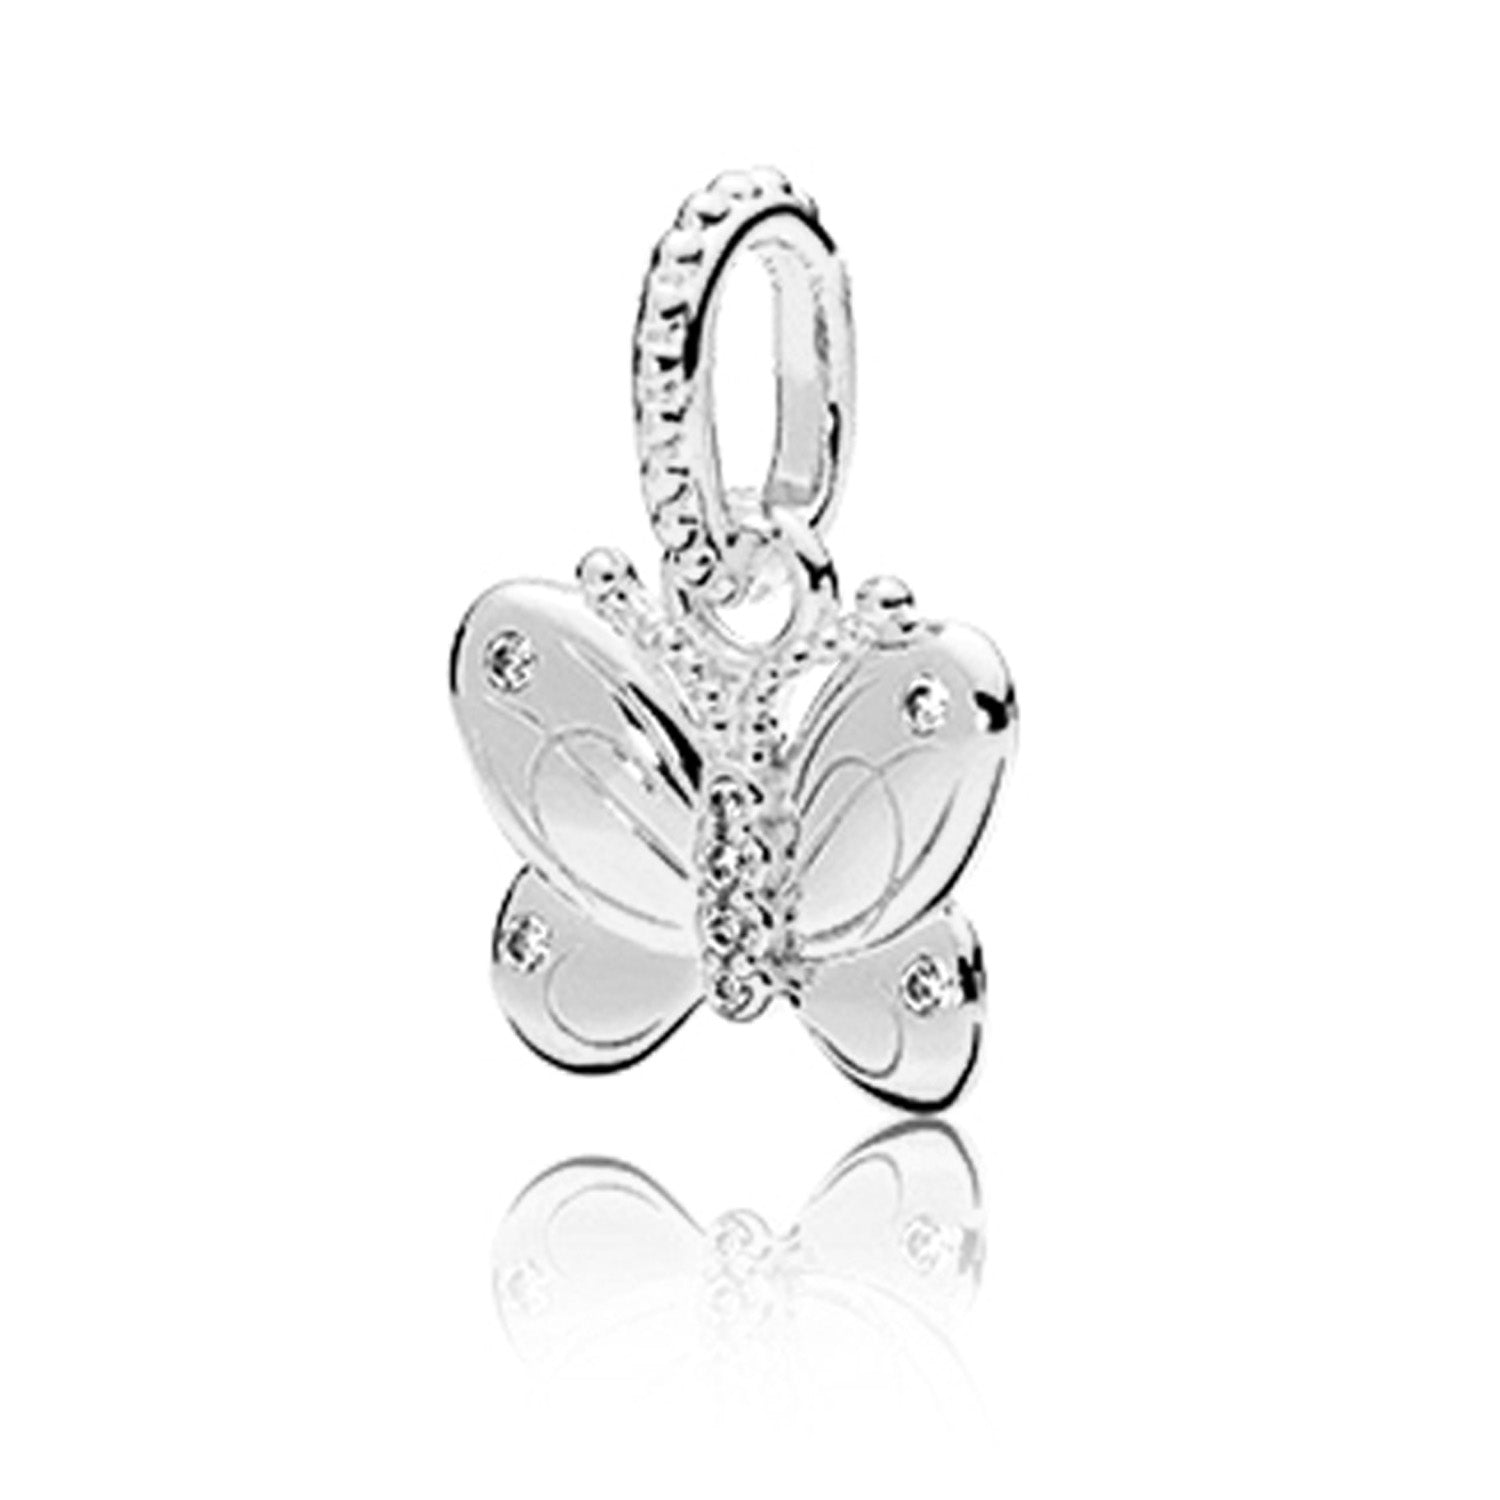 Jewdii 925 Sterling Silver Butterfly Charm Bead fit European Beads Wrist Band Bracelet or Necklace